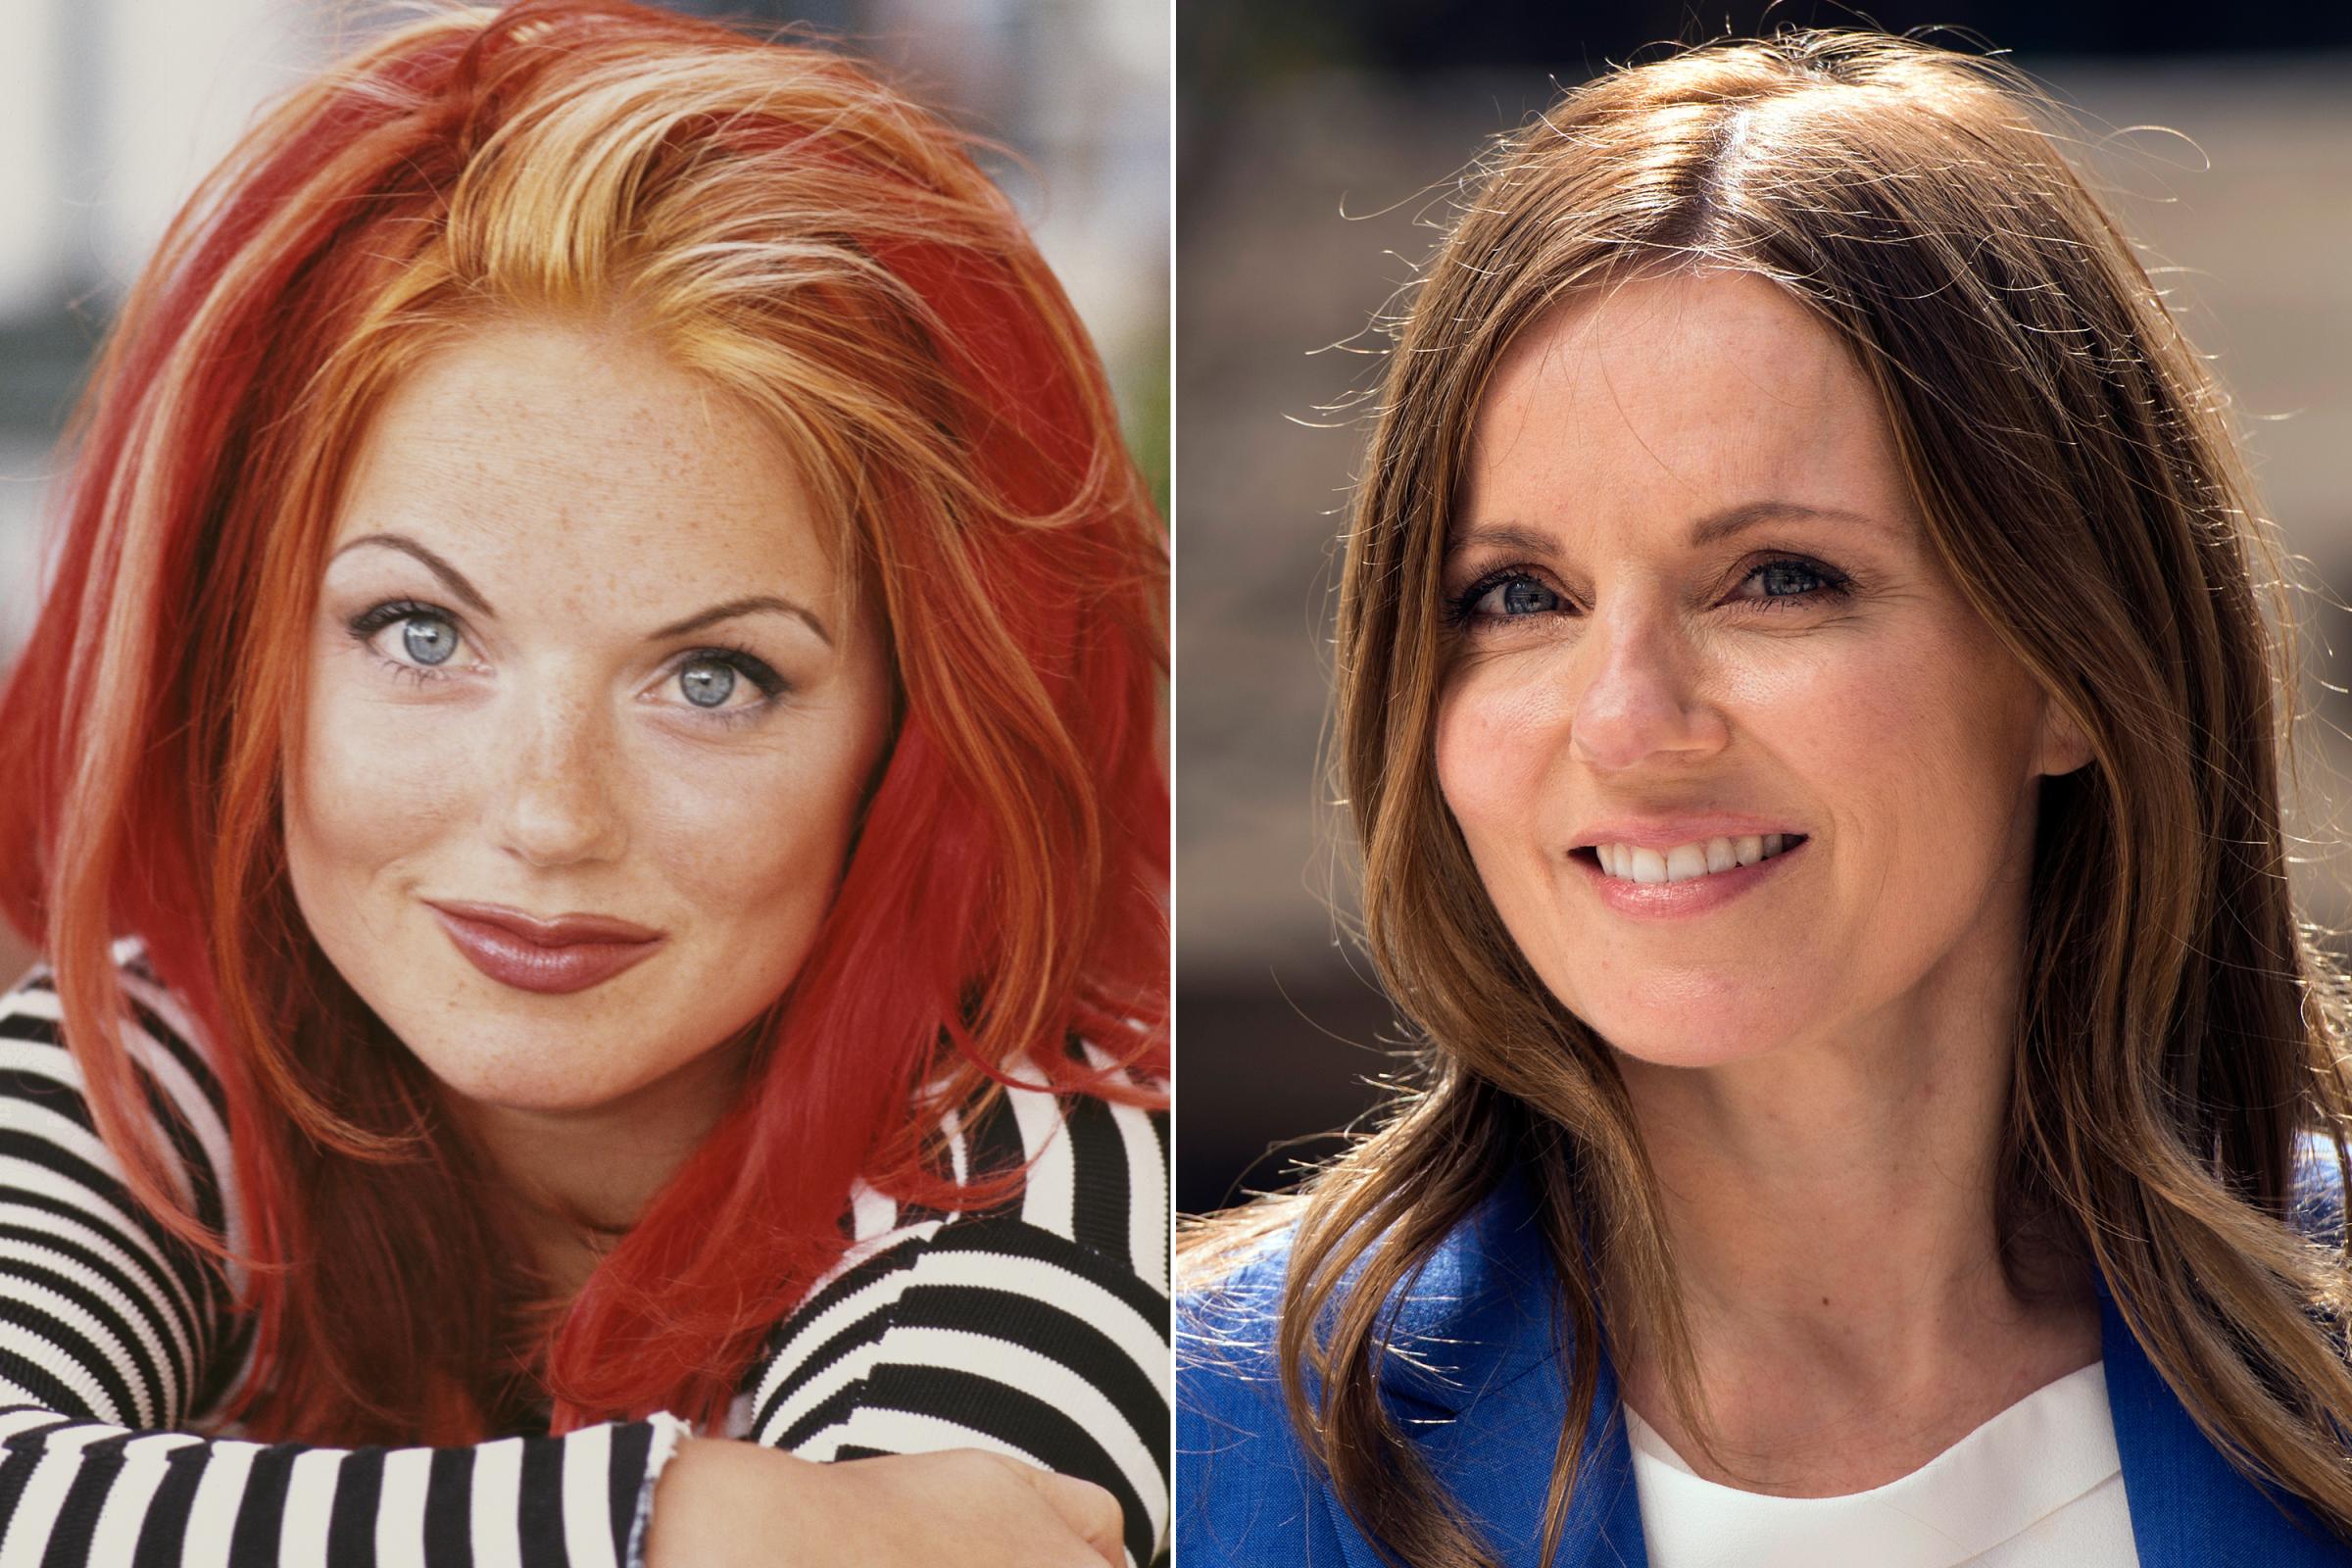 Geri Halliwell, aka Ginger Spice, in 1996 and 2016.